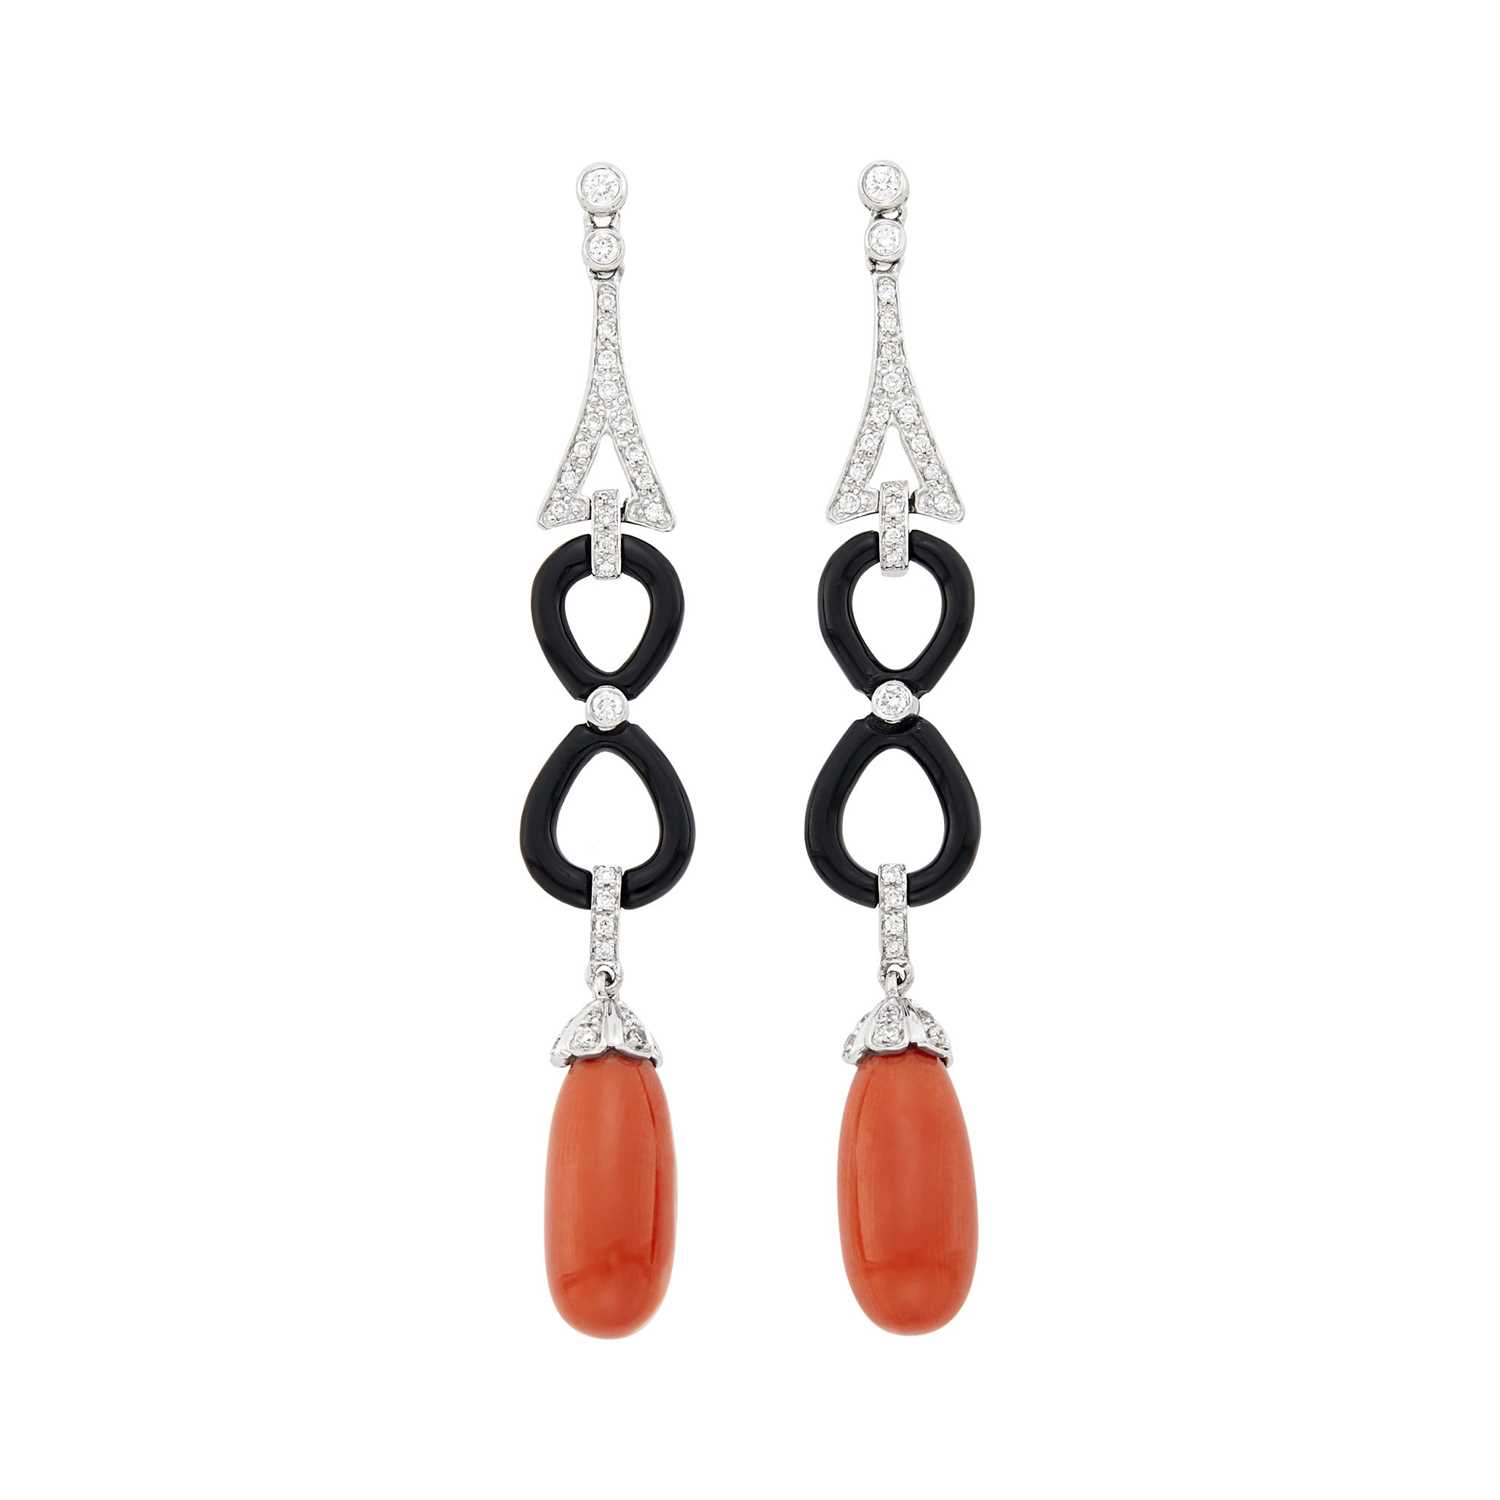 Lot 76 - Pair of White Gold, Coral, Black Onyx and Diamond Pendant-Earrings